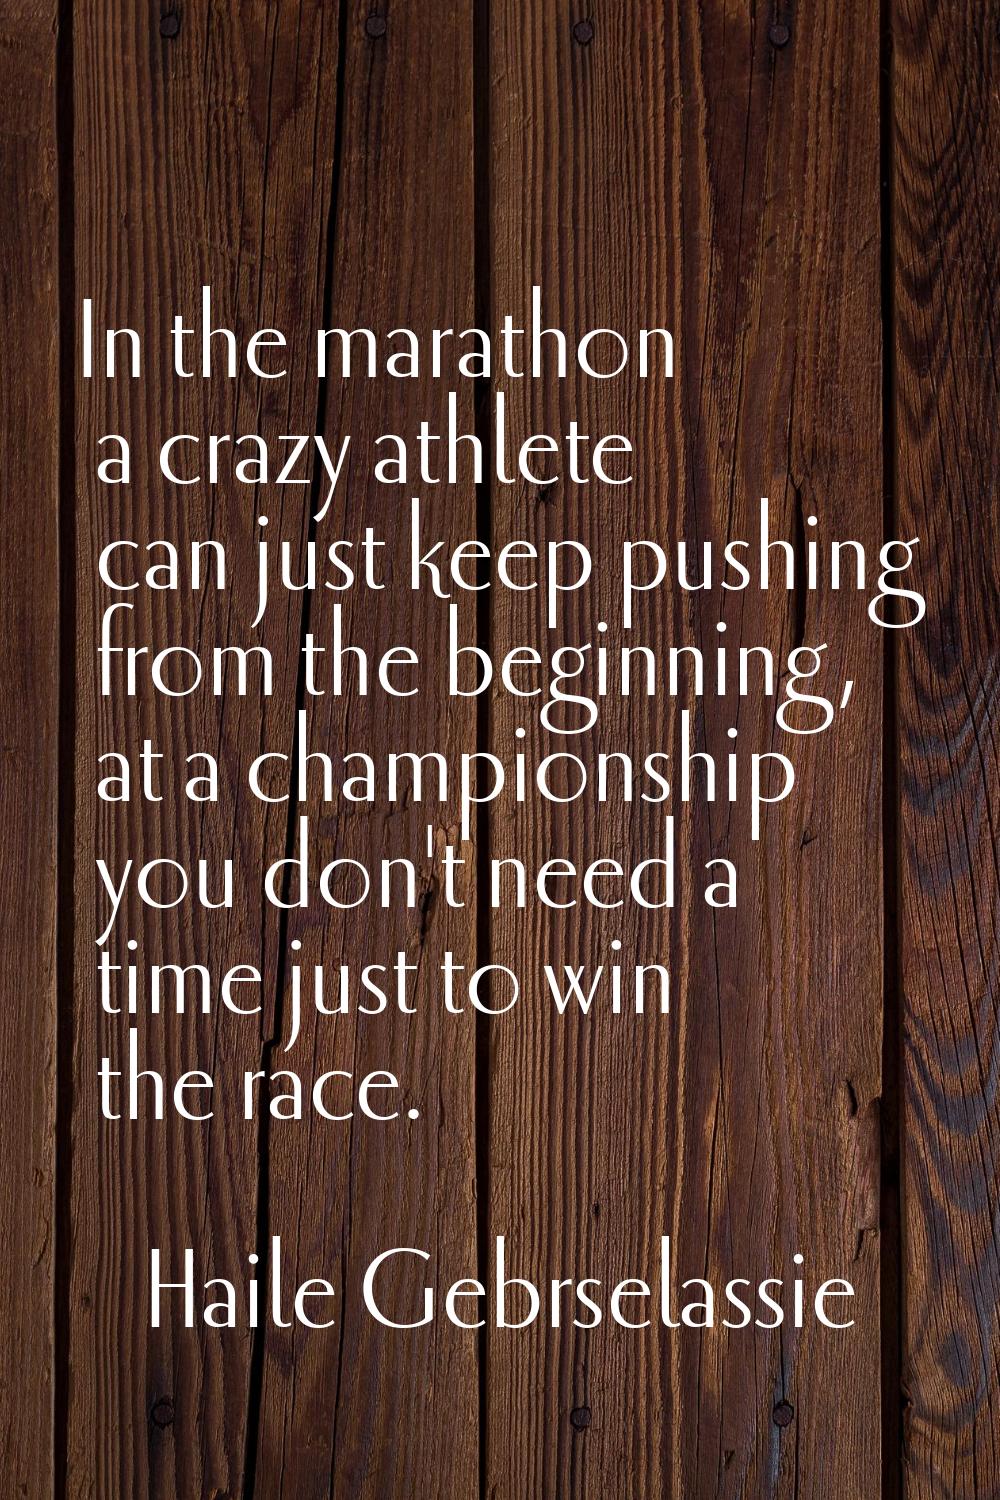 In the marathon a crazy athlete can just keep pushing from the beginning, at a championship you don